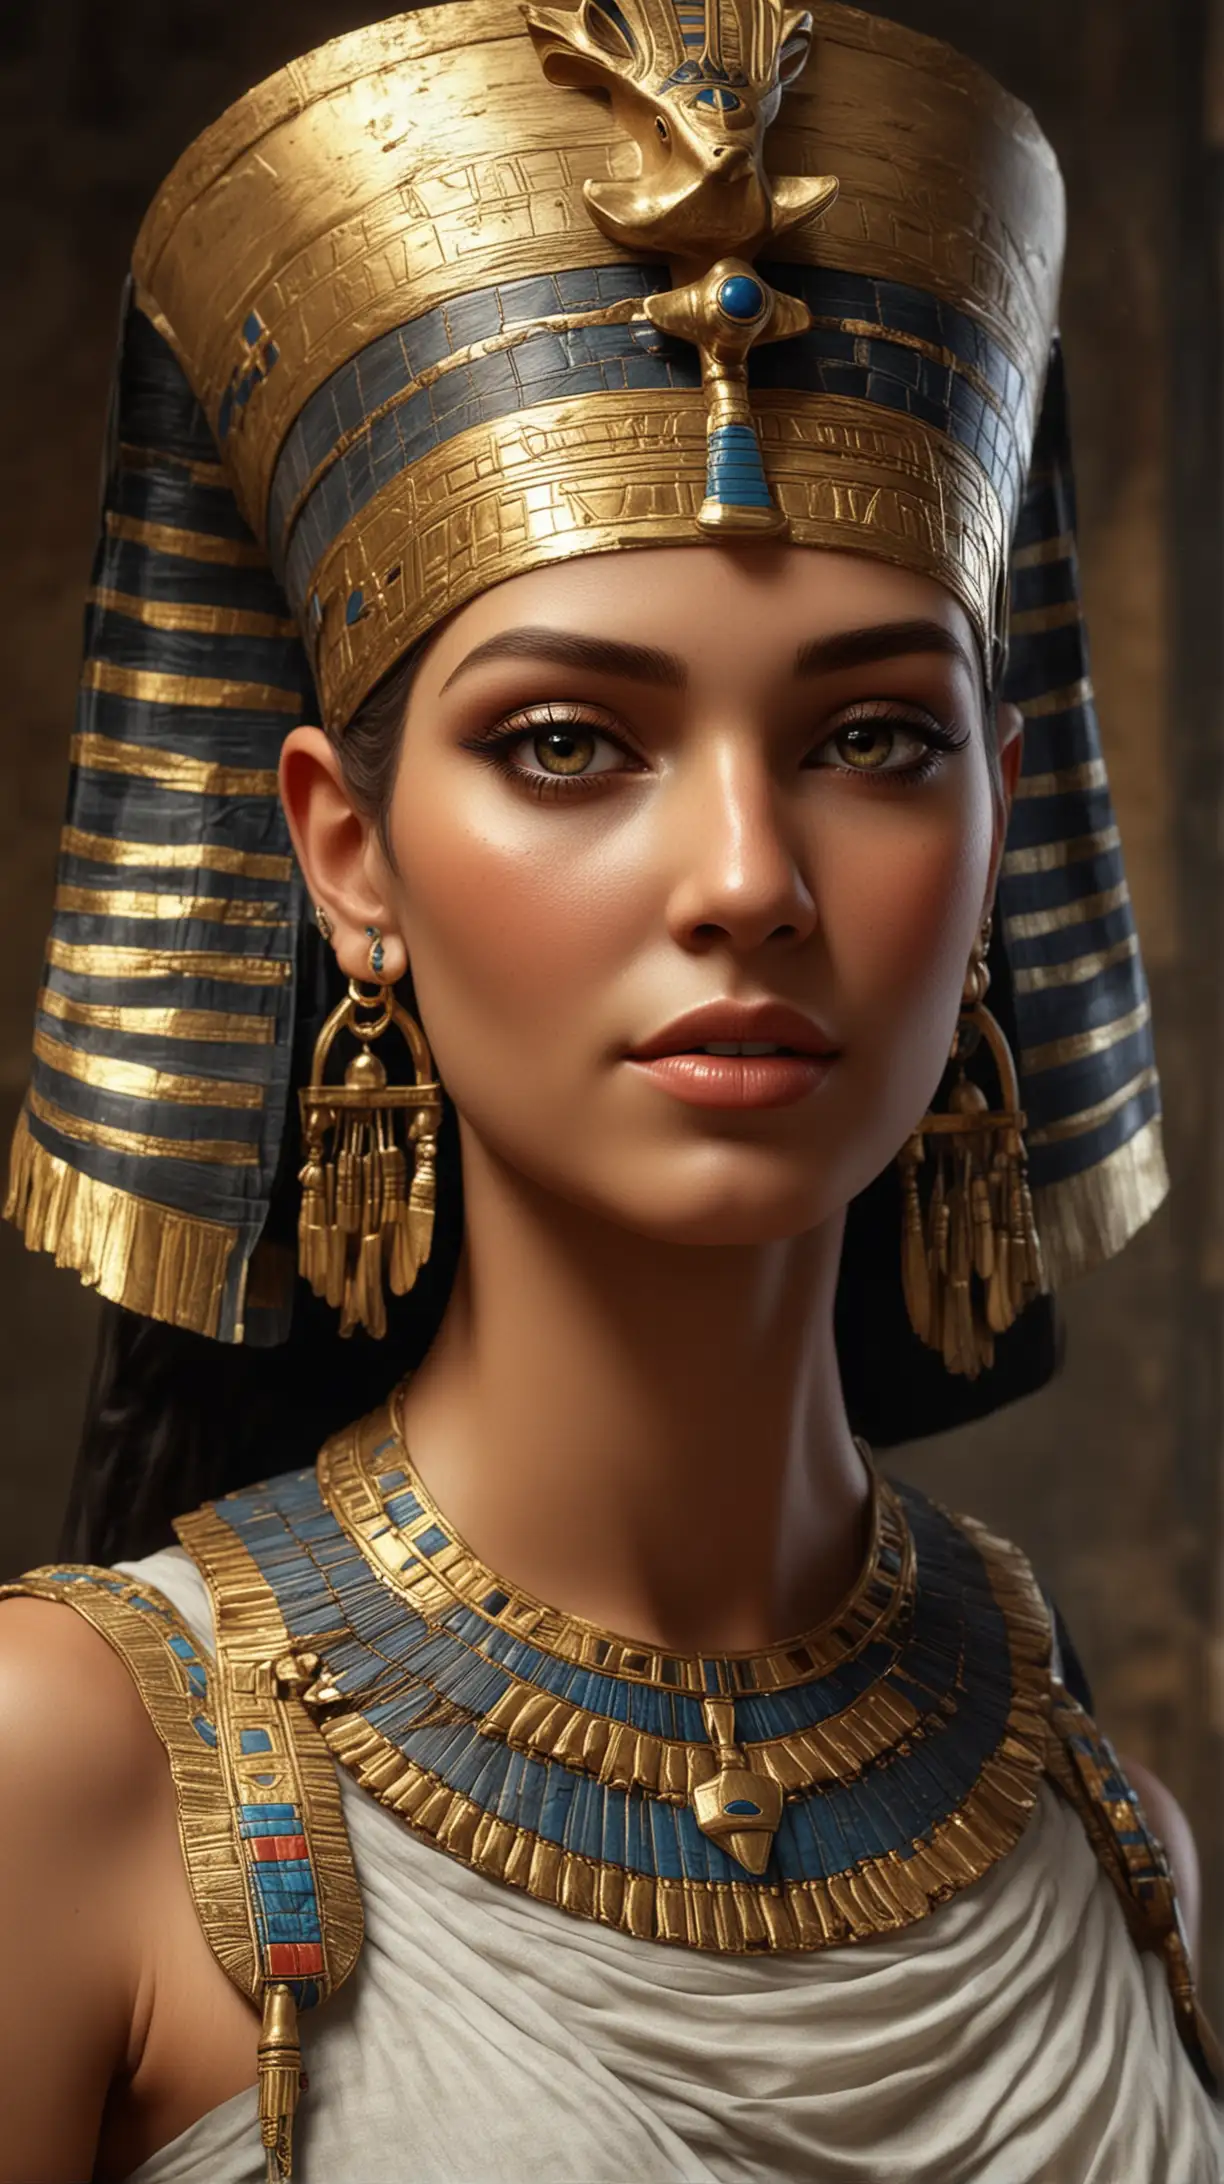 Hyper Realistic Portrait of a Beautiful Woman in Ancient Egypt